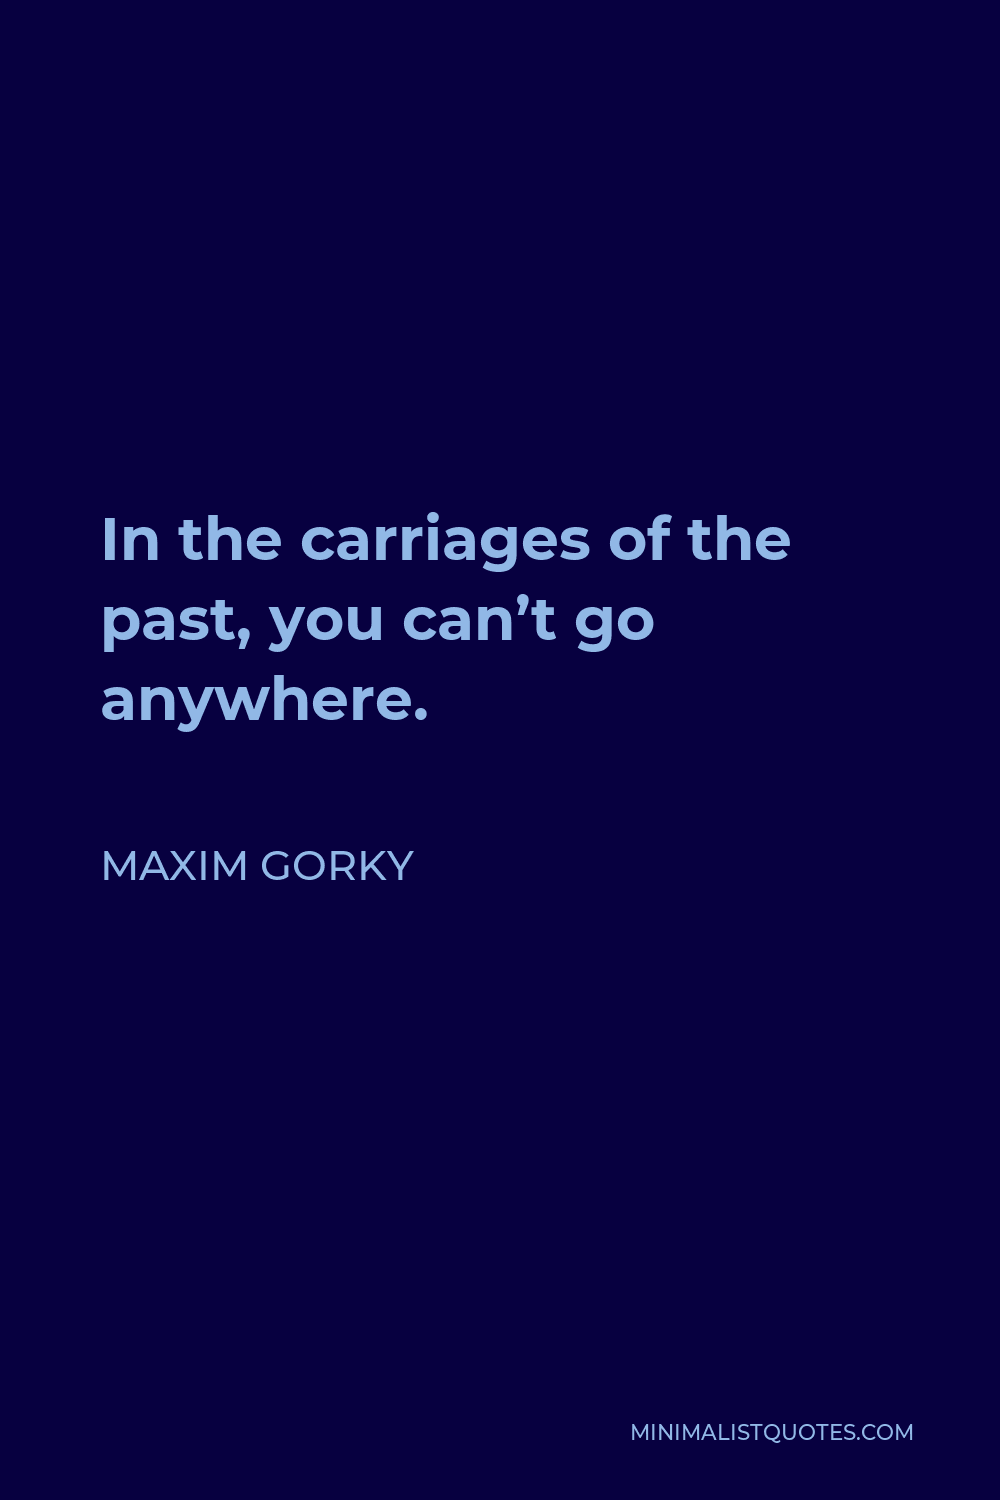 Maxim Gorky Quote - In the carriages of the past, you can’t go anywhere.